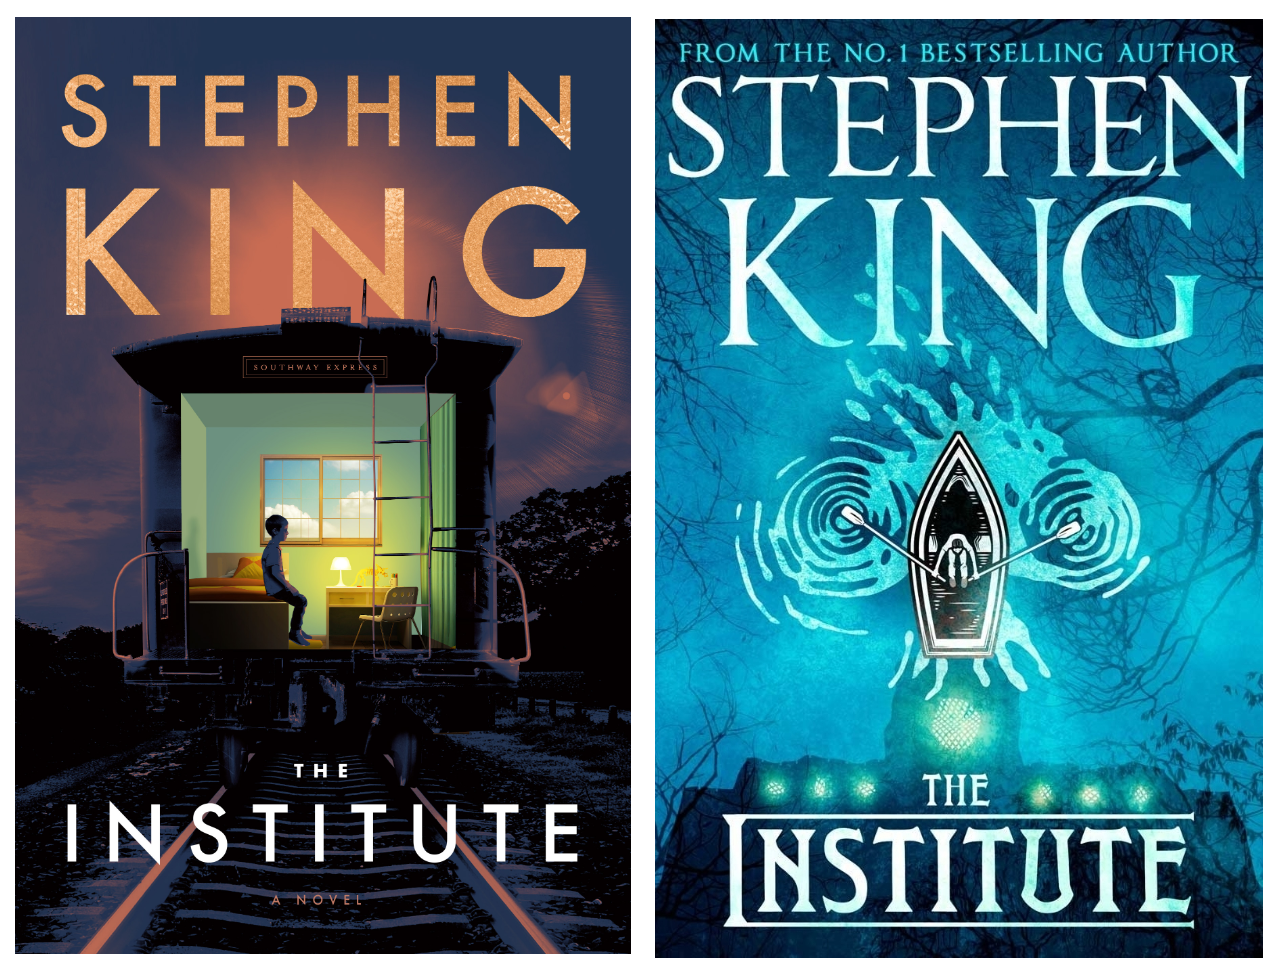 Sadie & Donnie's Side By Side Review of THE INSTITUTE by Stephen King